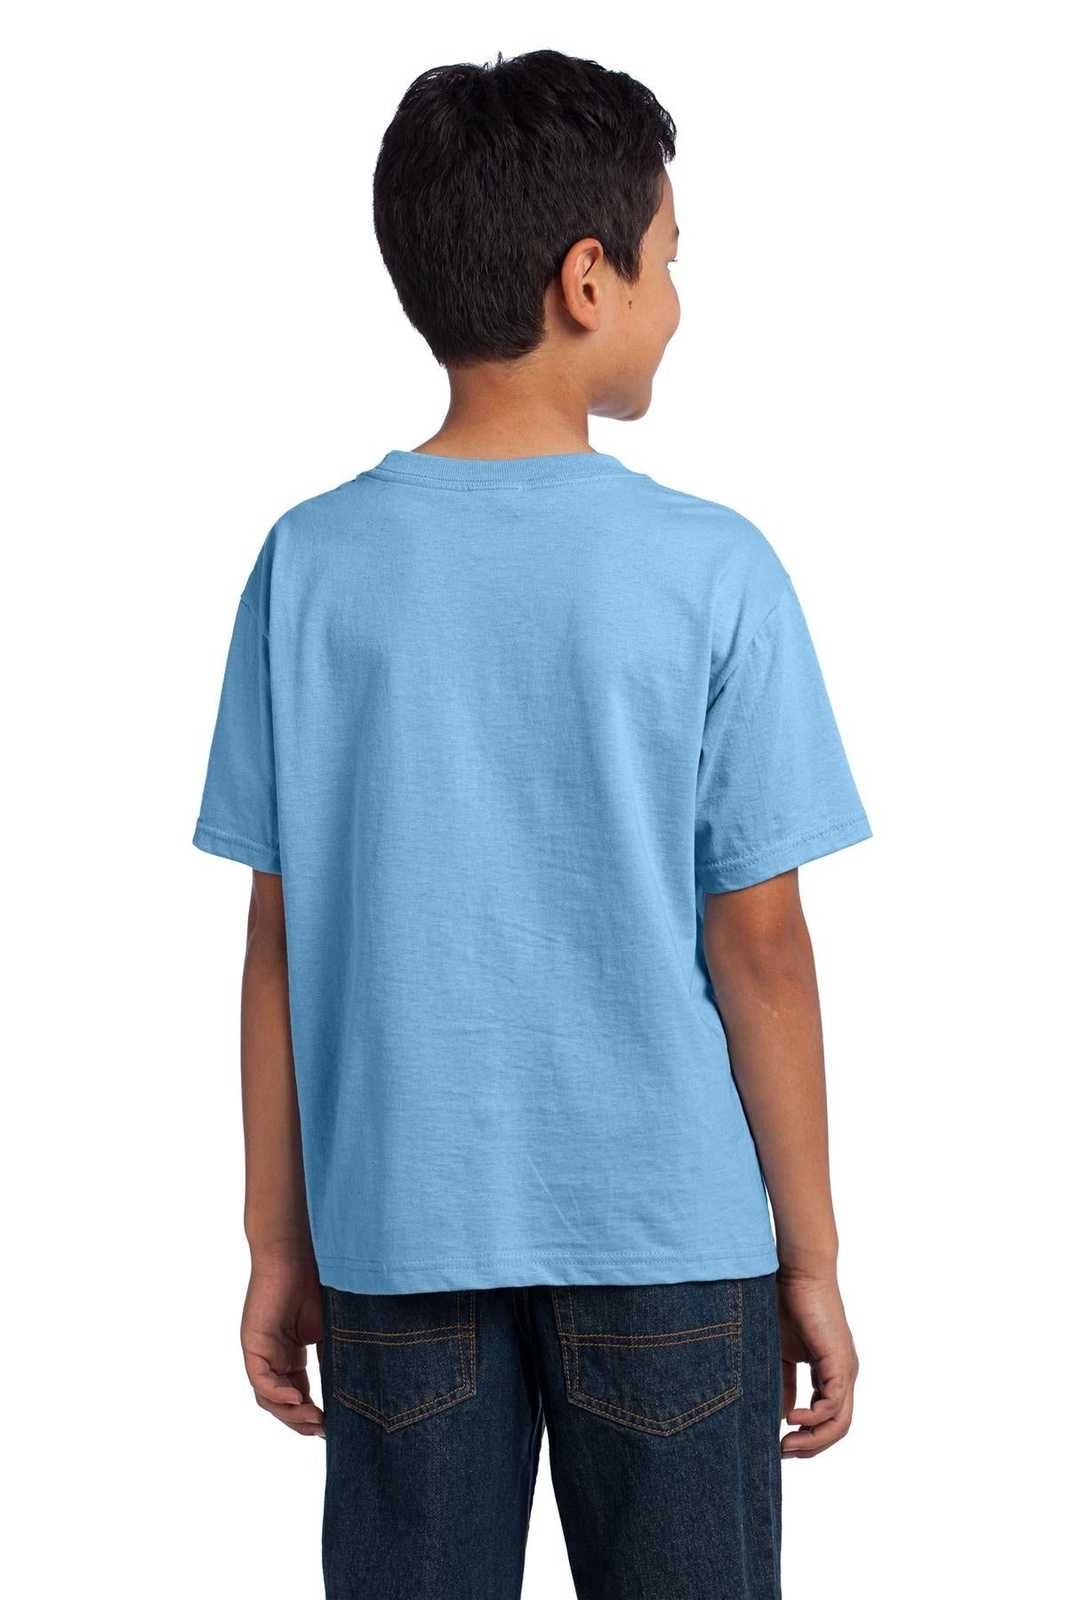 Fruit of the Loom 3930B Youth HD Cotton 100% Cotton T-Shirt - Light Blue - HIT a Double